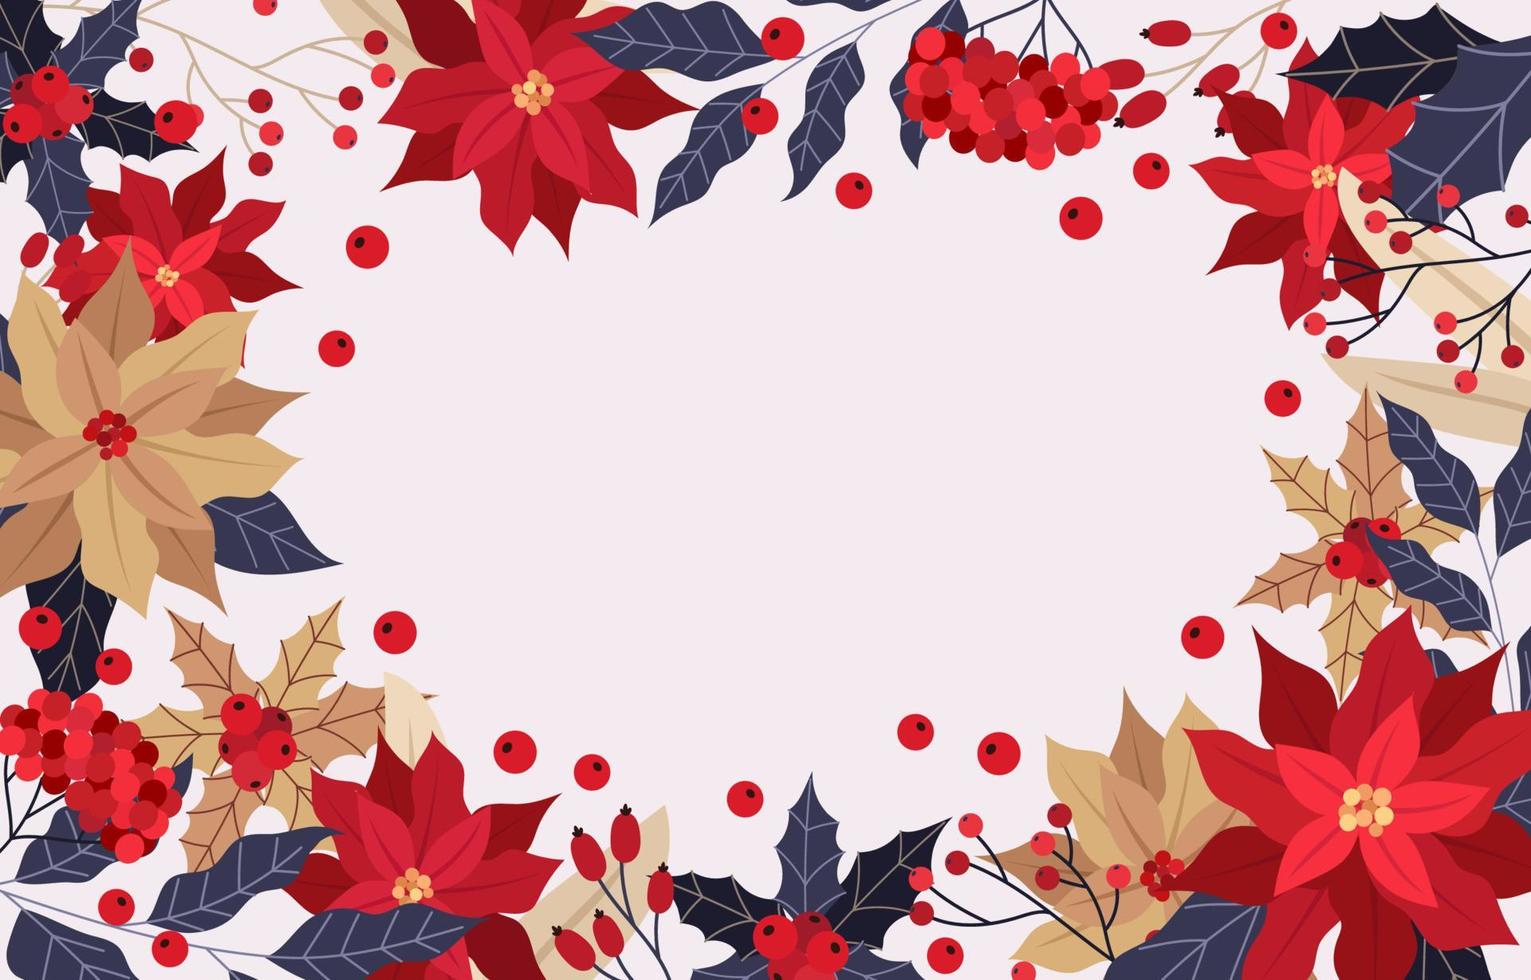 Vintage Christmas Background With Poinsettia vector